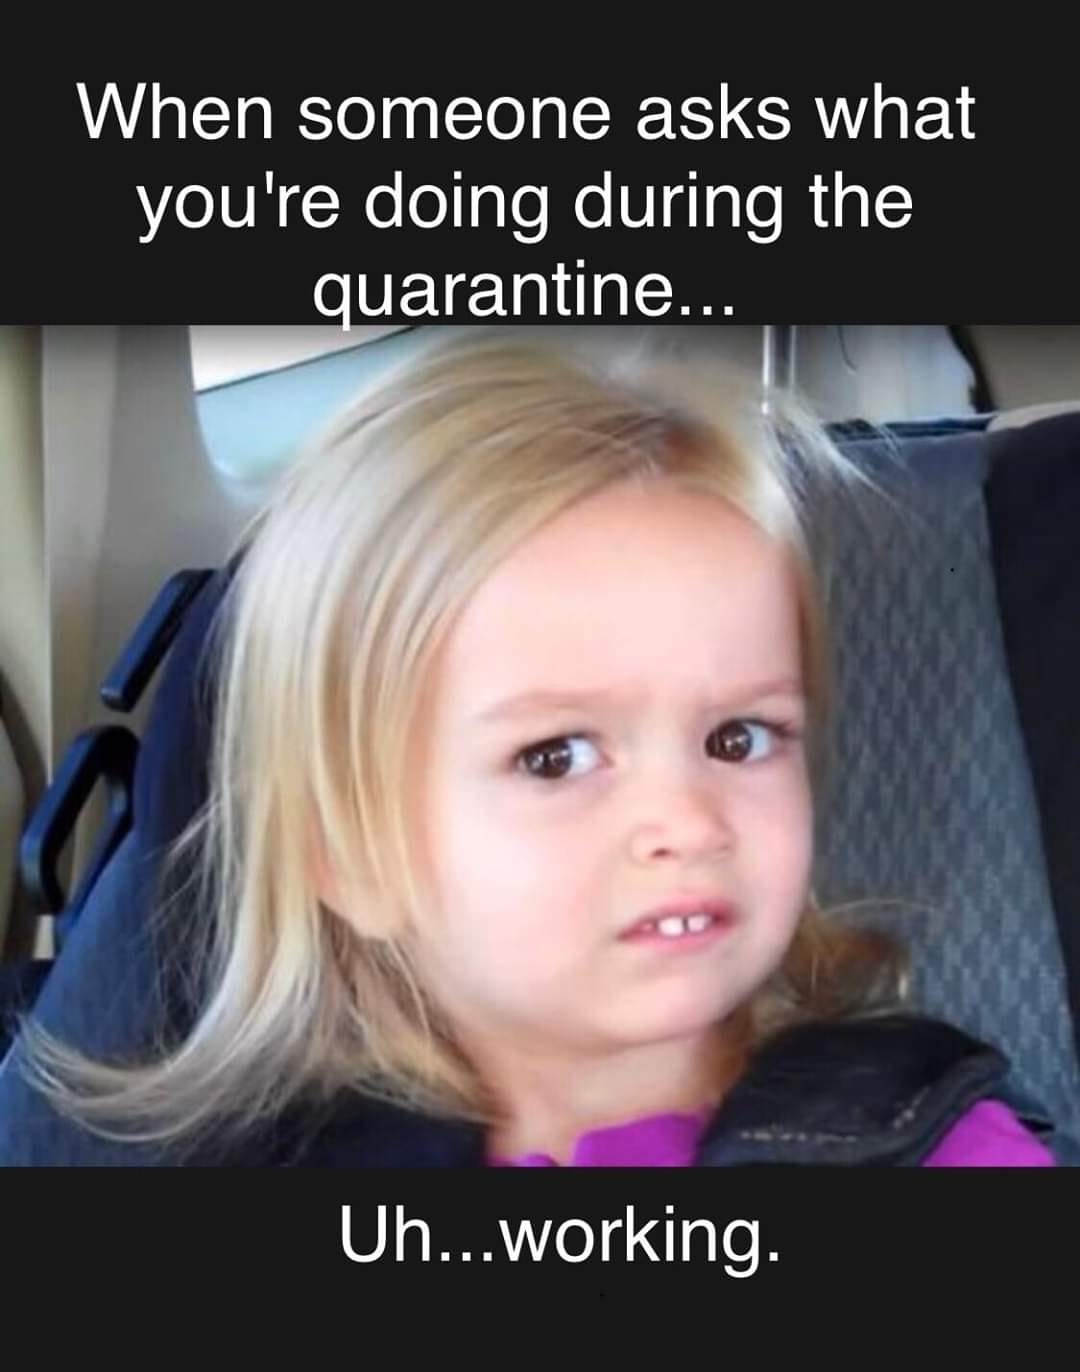 famous memes - When someone asks what you're doing during the quarantine... Uh...working.